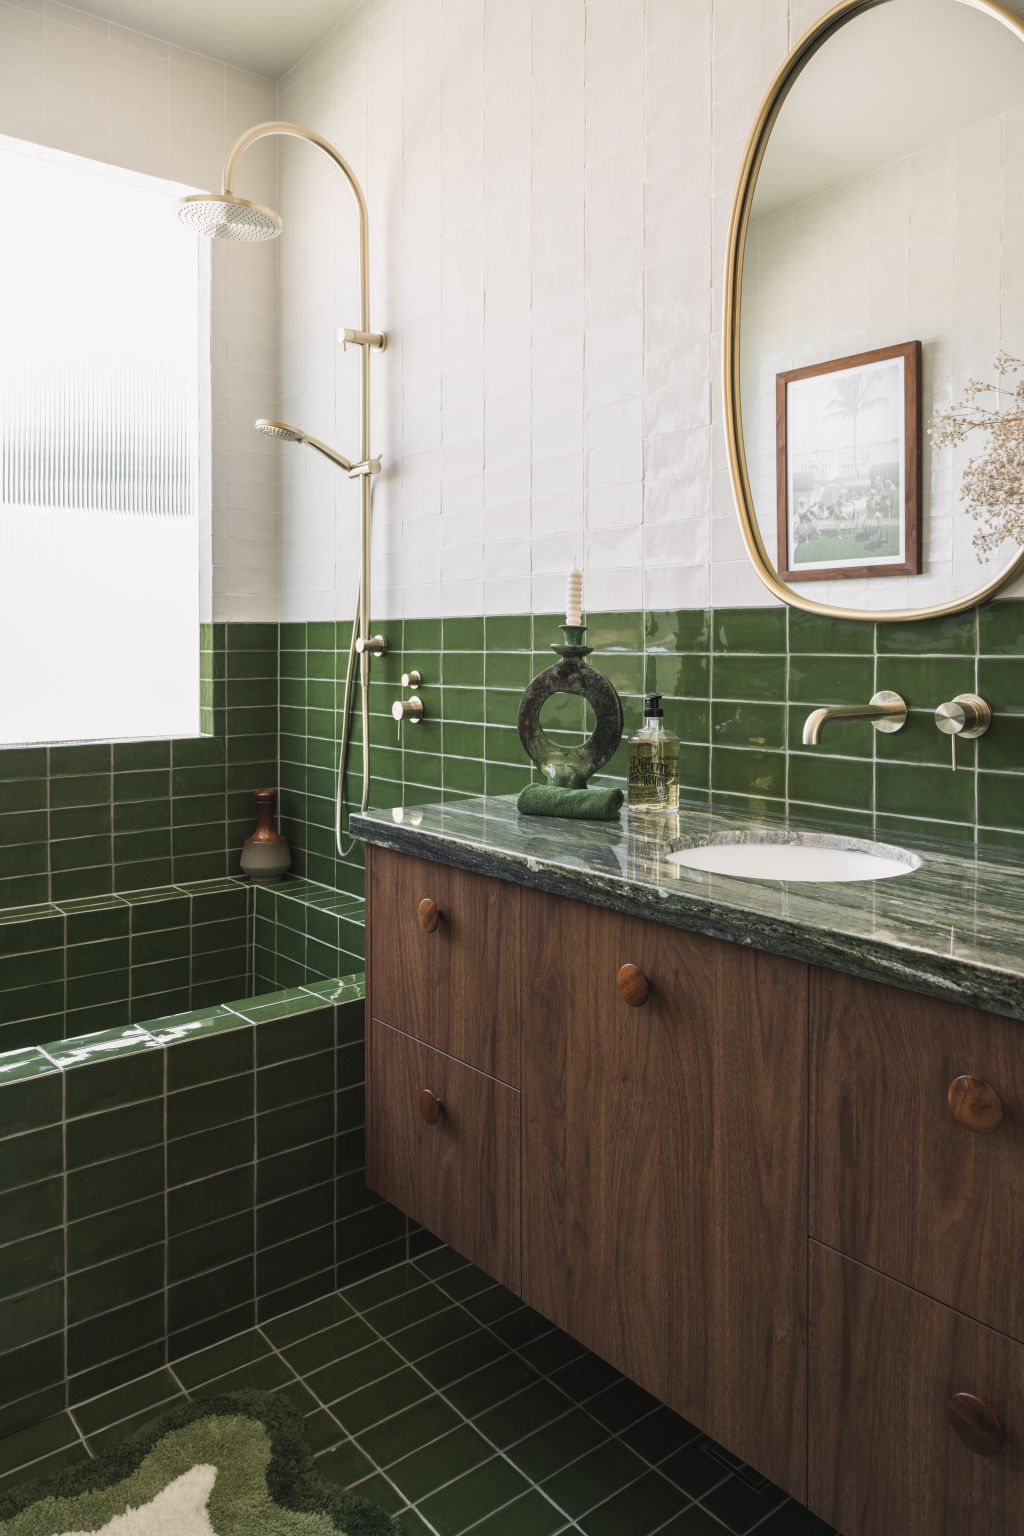 'We’re seeing this biophilic approach in colour selections with green, terracotta and warm whites as well as materials such as solid timber, natural stone,' Kirstin Radford says. Photo: Hannah Puechmarin